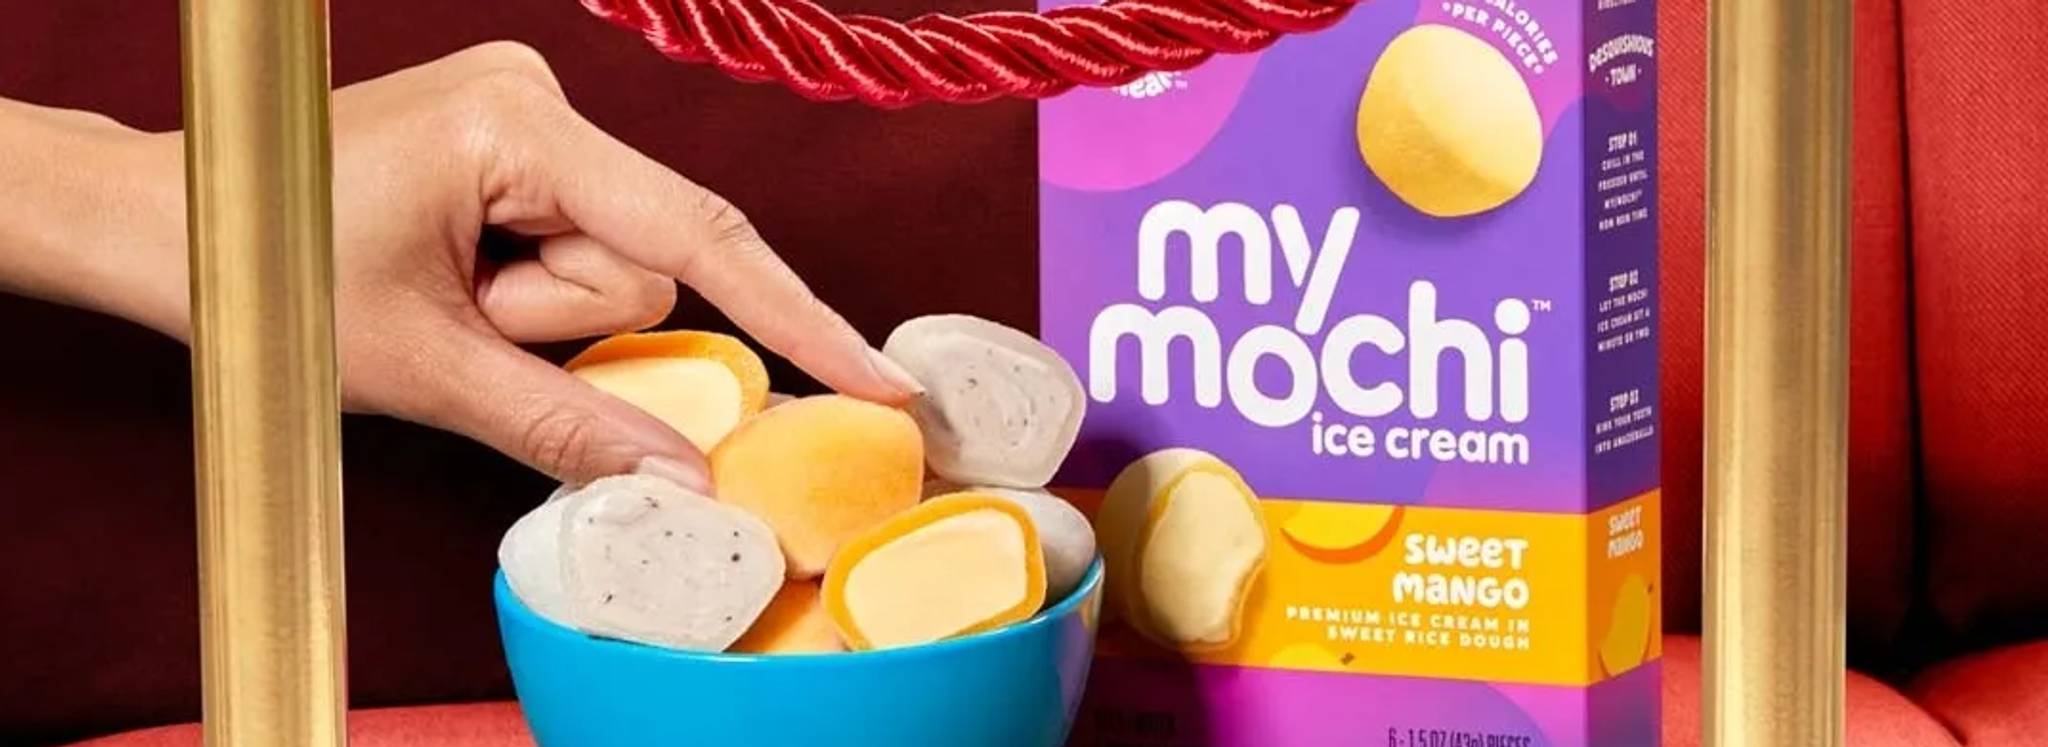 My/Mochi: East Asian snacking for global audiences